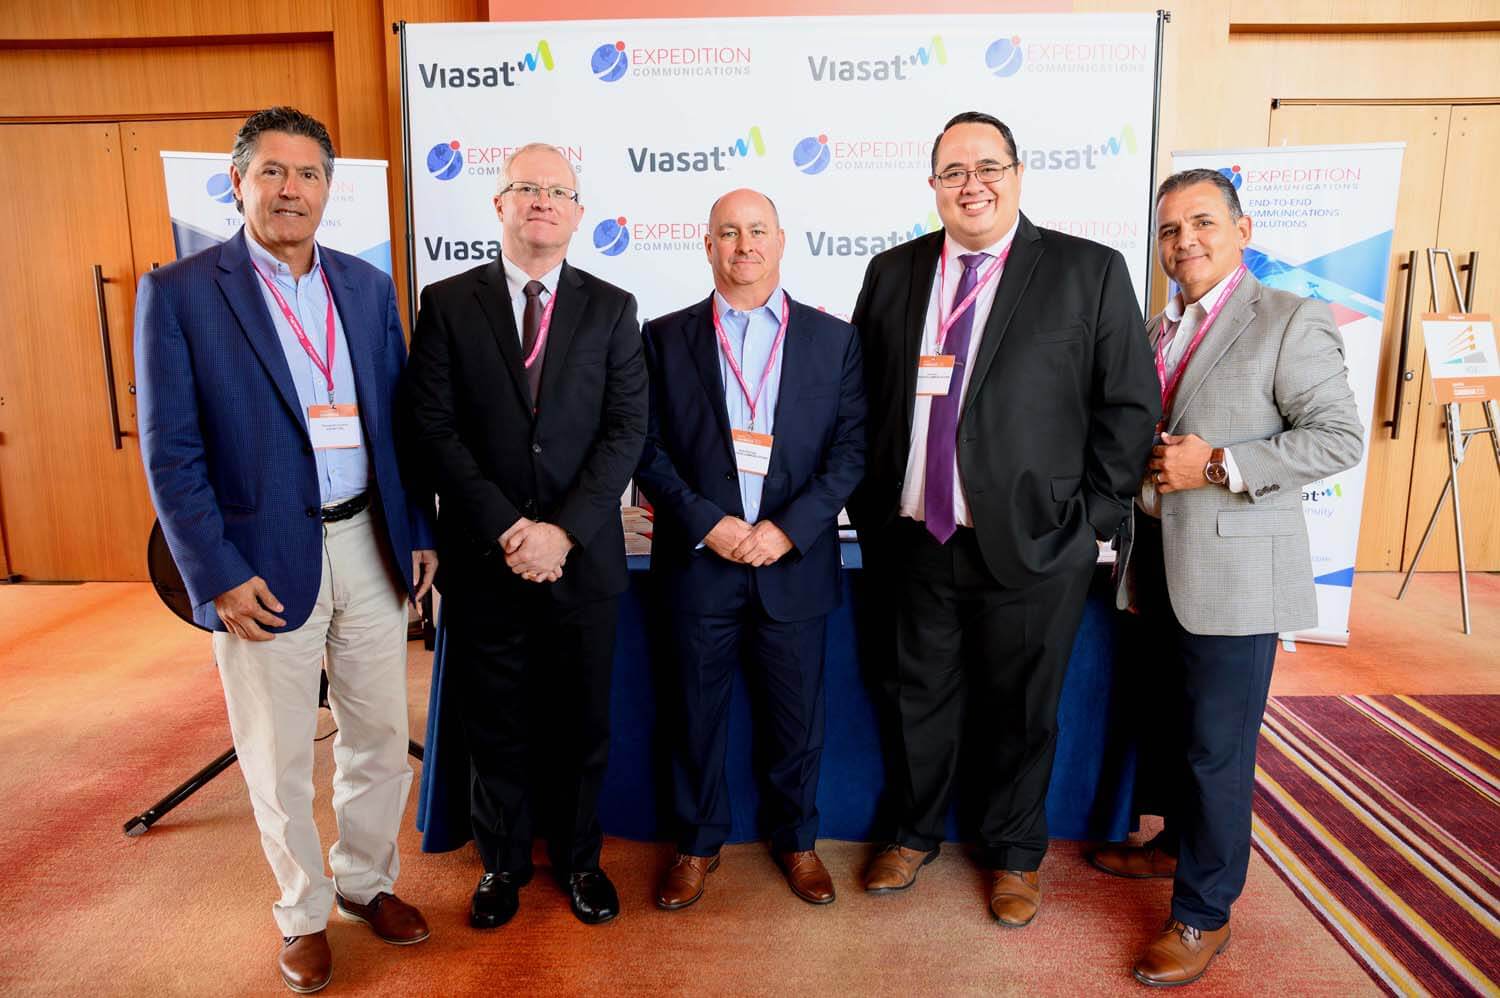 Expedition Communications and Viasat Team Photo